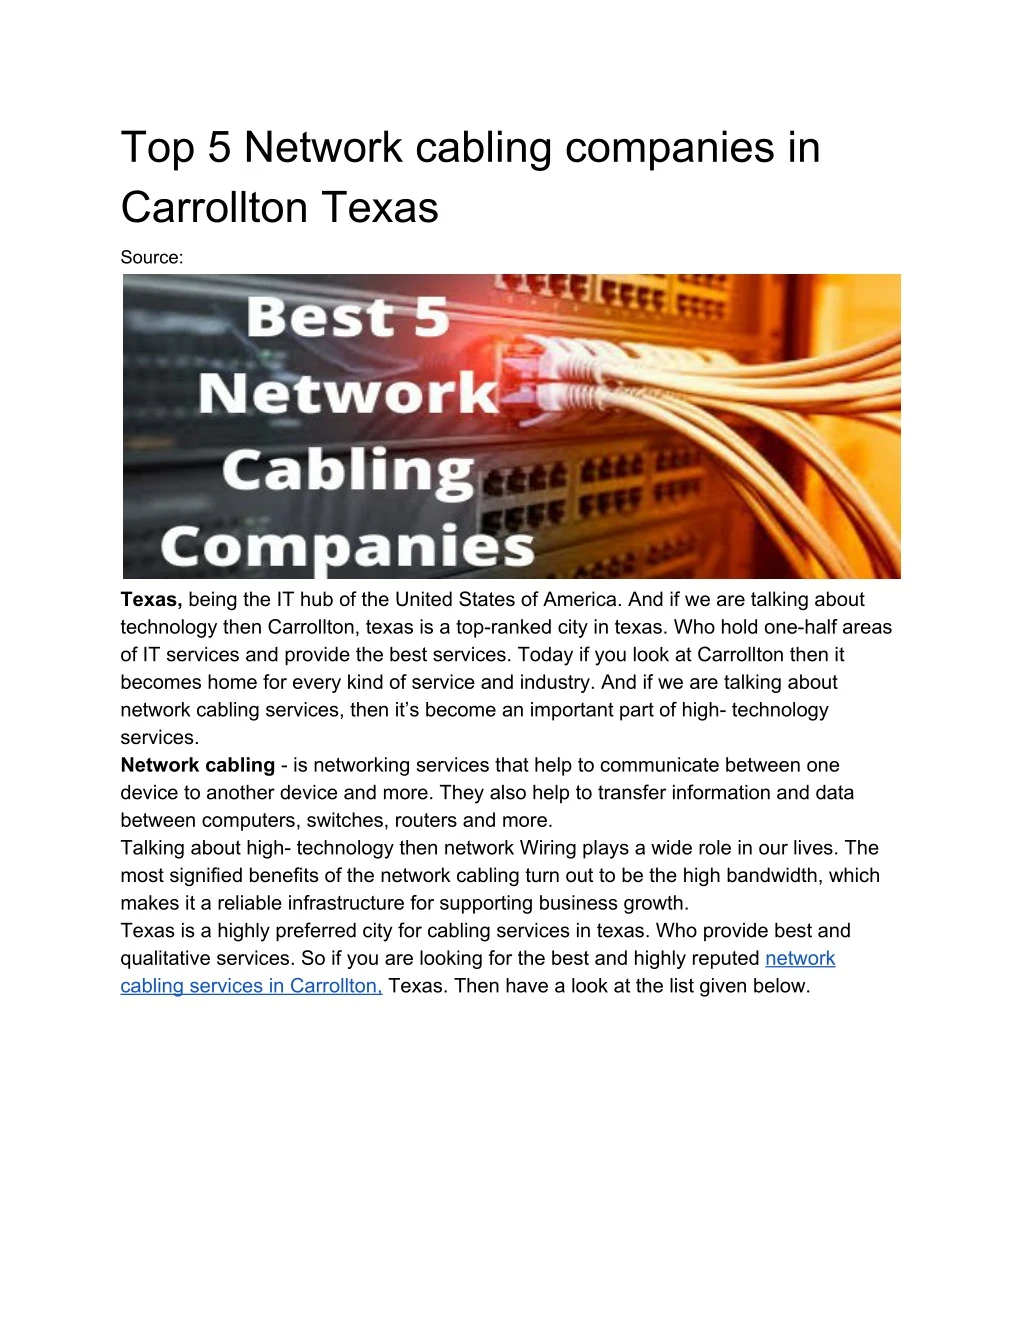 top 5 network cabling companies in carrollton